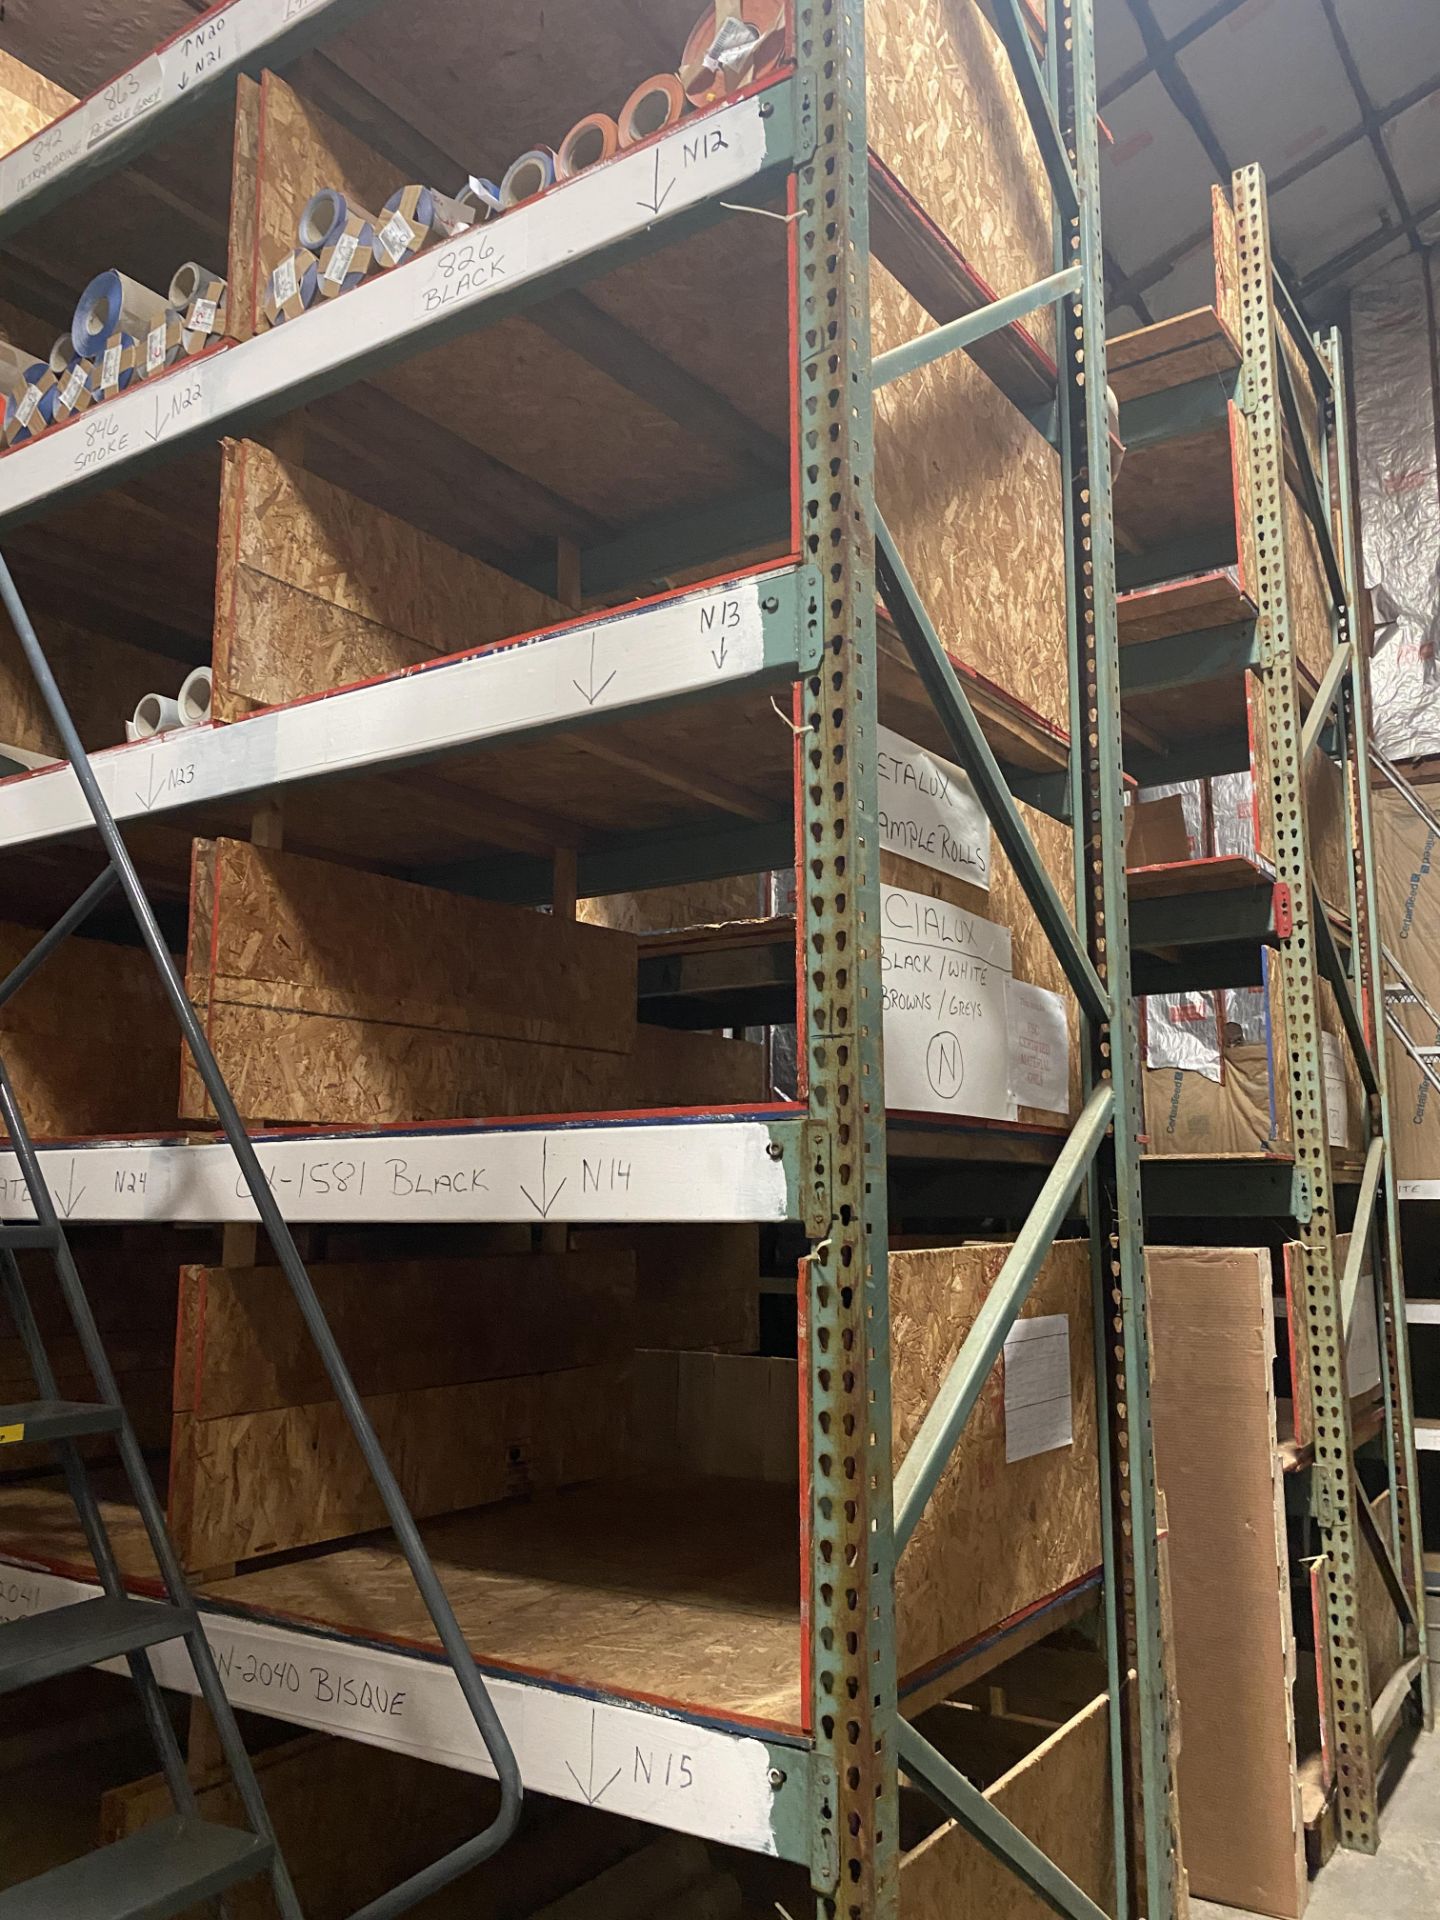 LOT (14) Sections Pallet Shelving 12'W x 42" D x Approx. 12' H - Image 2 of 4